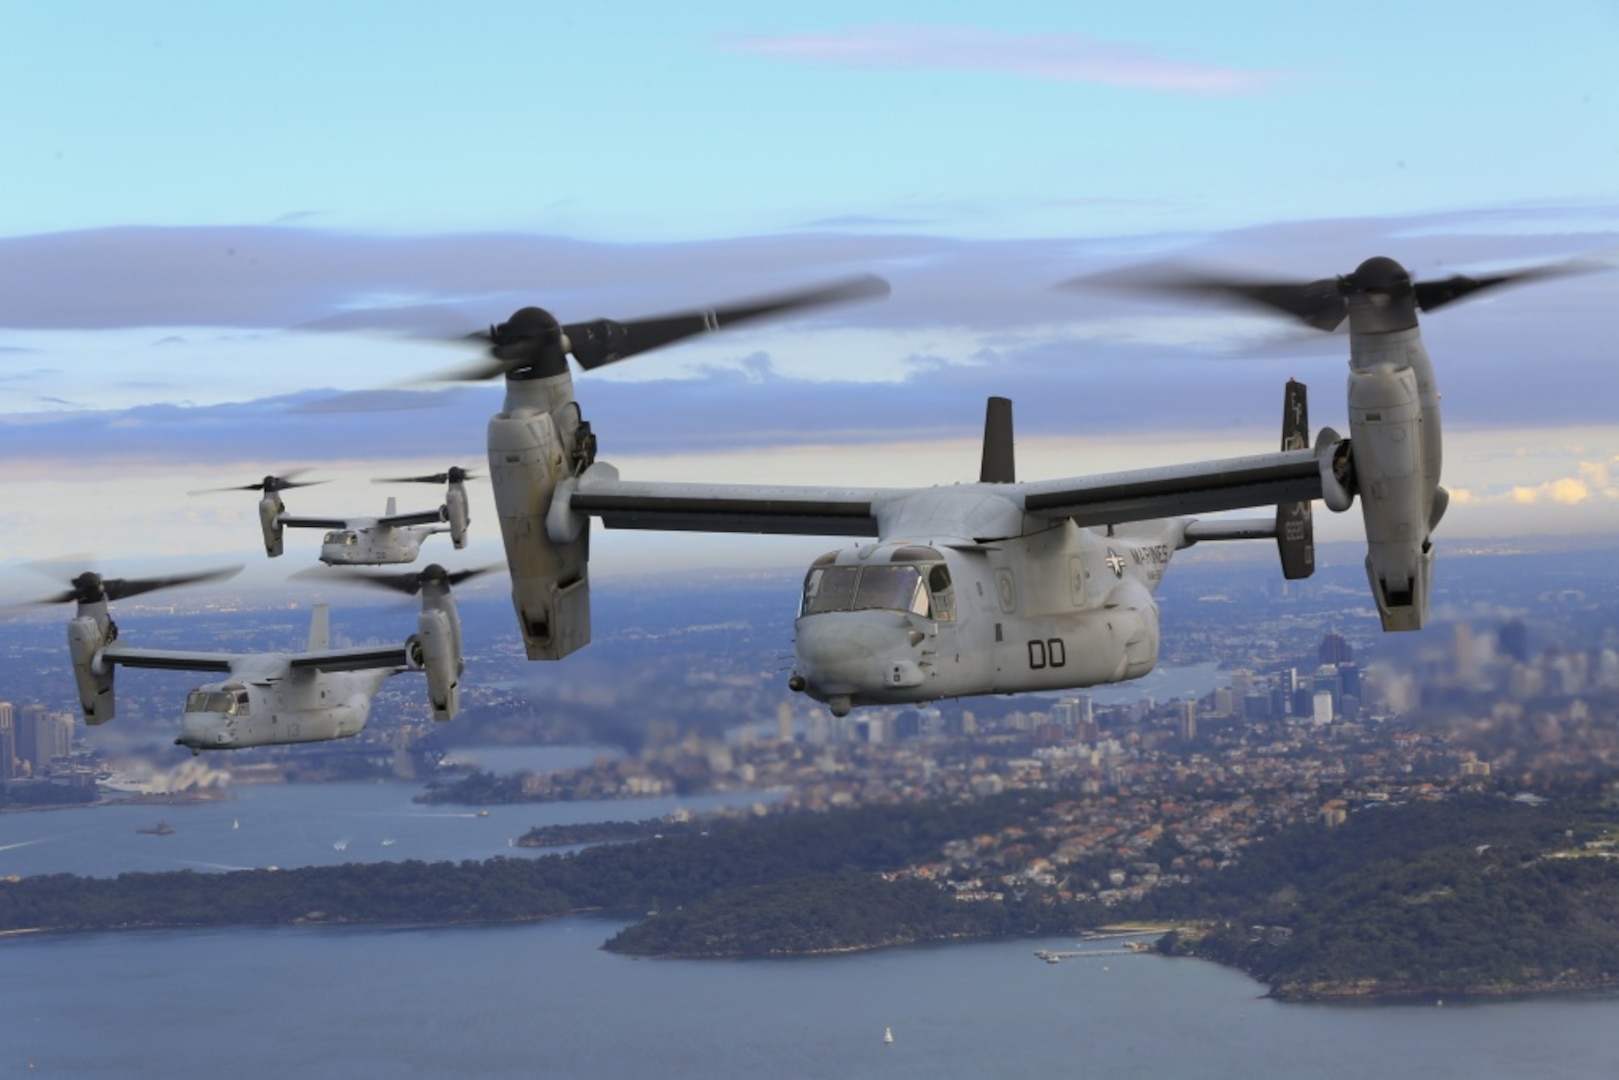 A set of MV-22B Osprey tiltrotor aircraft fly in formation above the Pacific Ocean off the coast of Sydney, Australia, June 29, 2017. The MV-22Bs belong to Marine Medium Tiltrotor Squadron 265 (Reinforced). VMM-265 (Rein.) is part of the Aviation Combat Element of the 31st Marine Expeditionary Unit. The 31st MEU and the Bonhomme Richard Expeditionary Strike Group arrived in Sydney after transiting south across the vast Pacific Ocean, from Okinawa, Japan, to southeastern Australia in just over three weeks. Sydney is a favorite port stop for both Marines and Sailors crossing the Pacific. The 31st MEU partners with the Navy’s Amphibious Squadron 11 to form the amphibious component of the Bonhomme Richard Expeditionary Strike Group. The 31st MEU and PHIBRON 11 combine to provide a cohesive blue-green team capable of accomplishing a variety of missions across the Indo-Asia-Pacific region. 